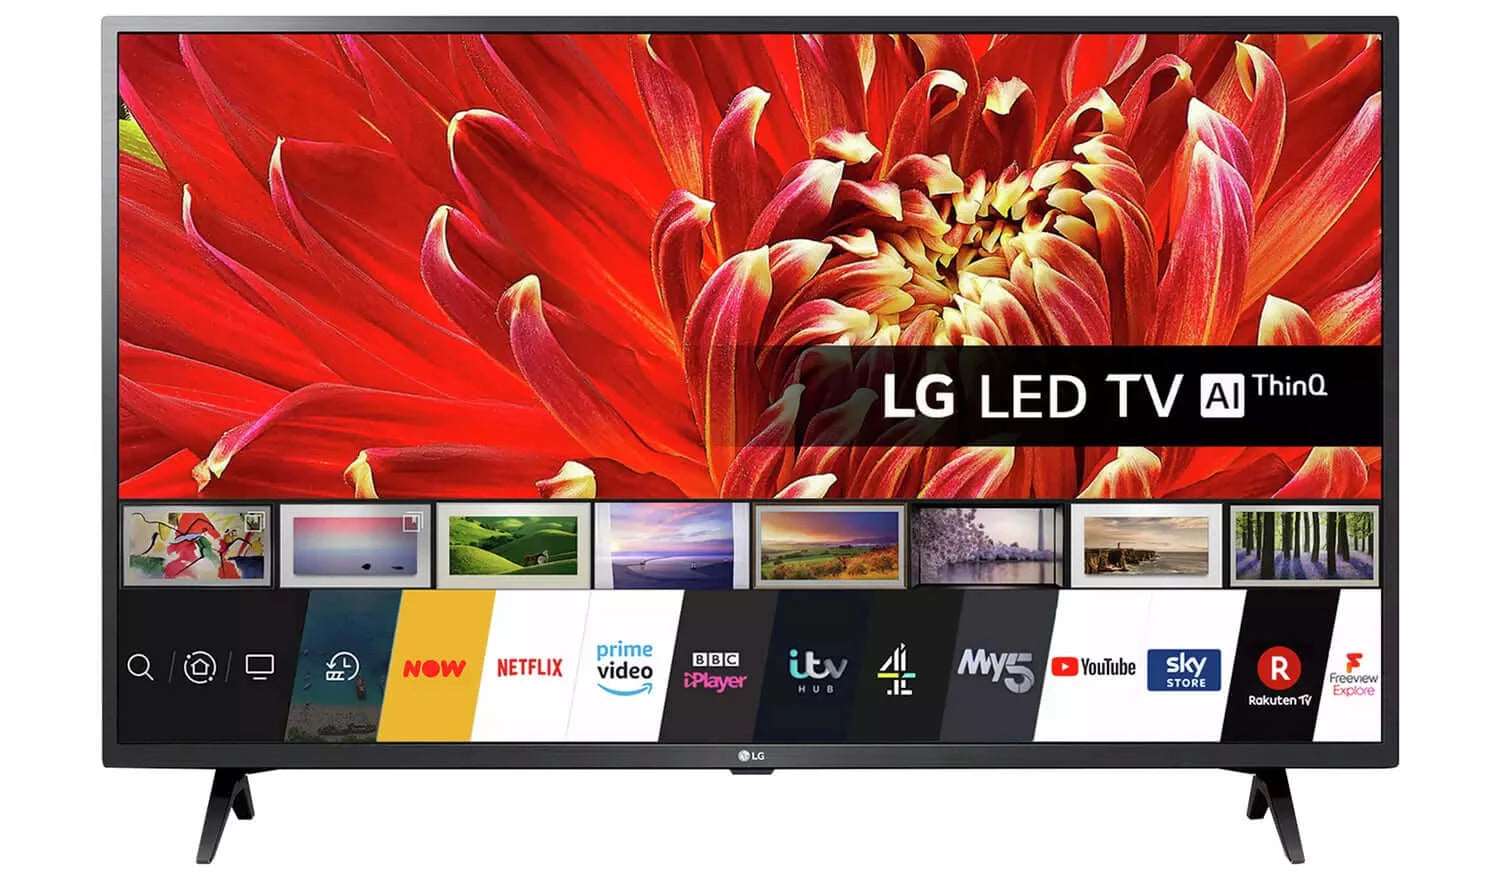 LG 43 Inch 43LM6300 Smart Full HD HDR LED Freeview TV